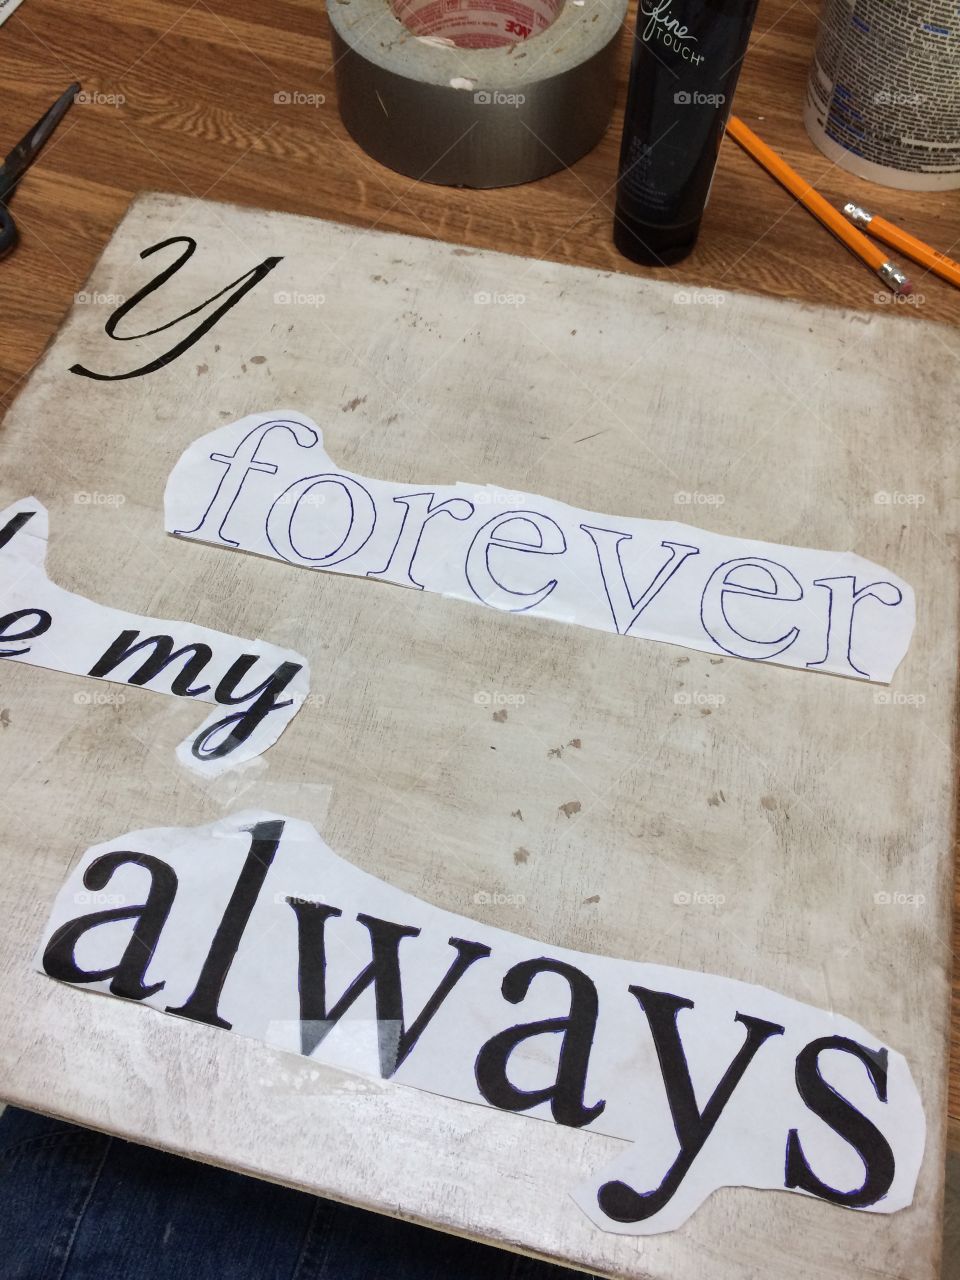 Working table . Making a sign
